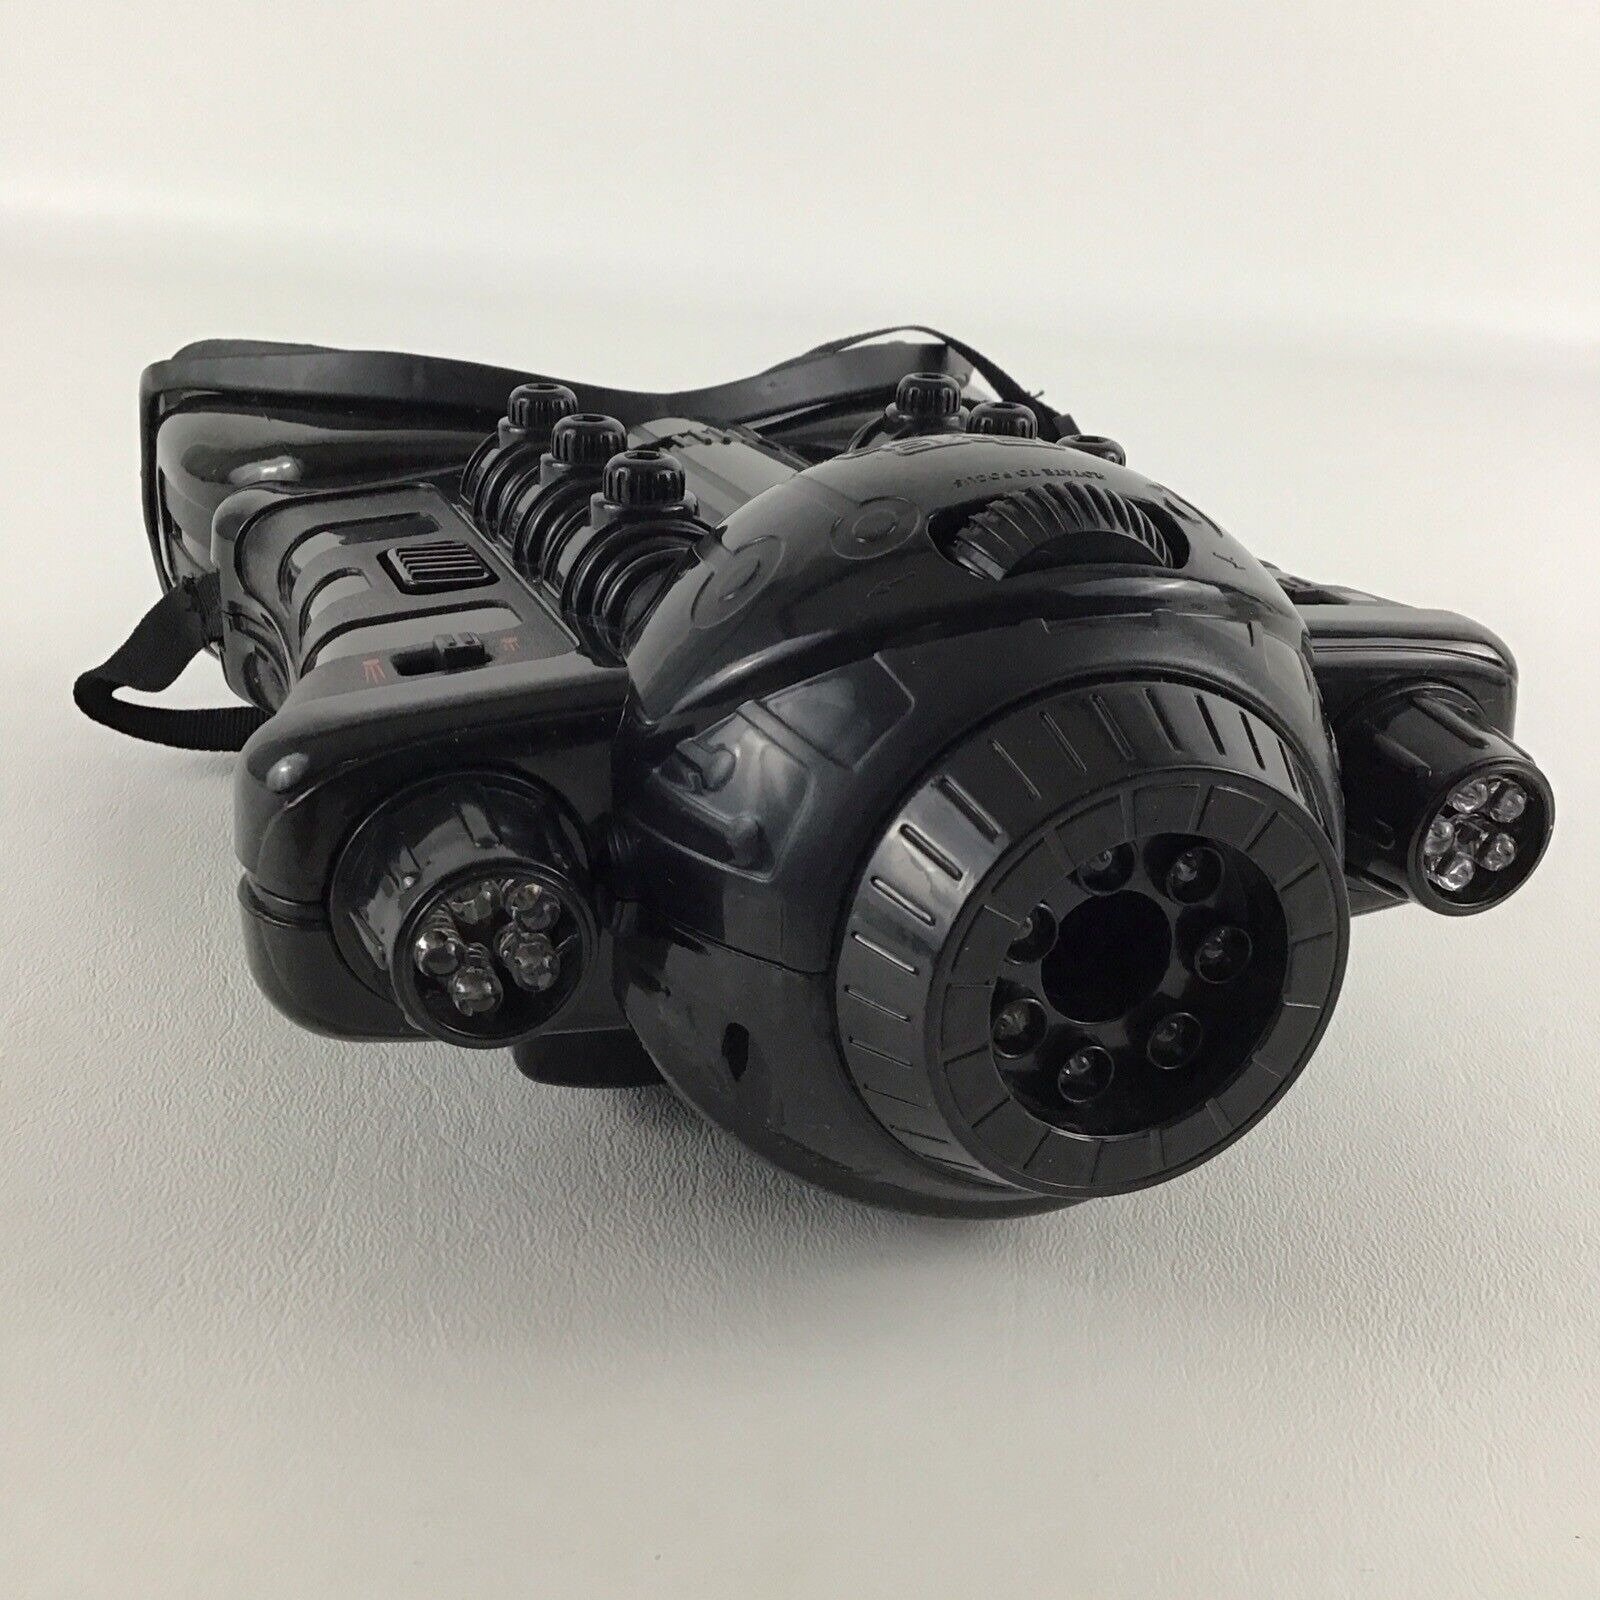 Review: Jakks Pacific EyeClops Night Vision Goggles 2.0